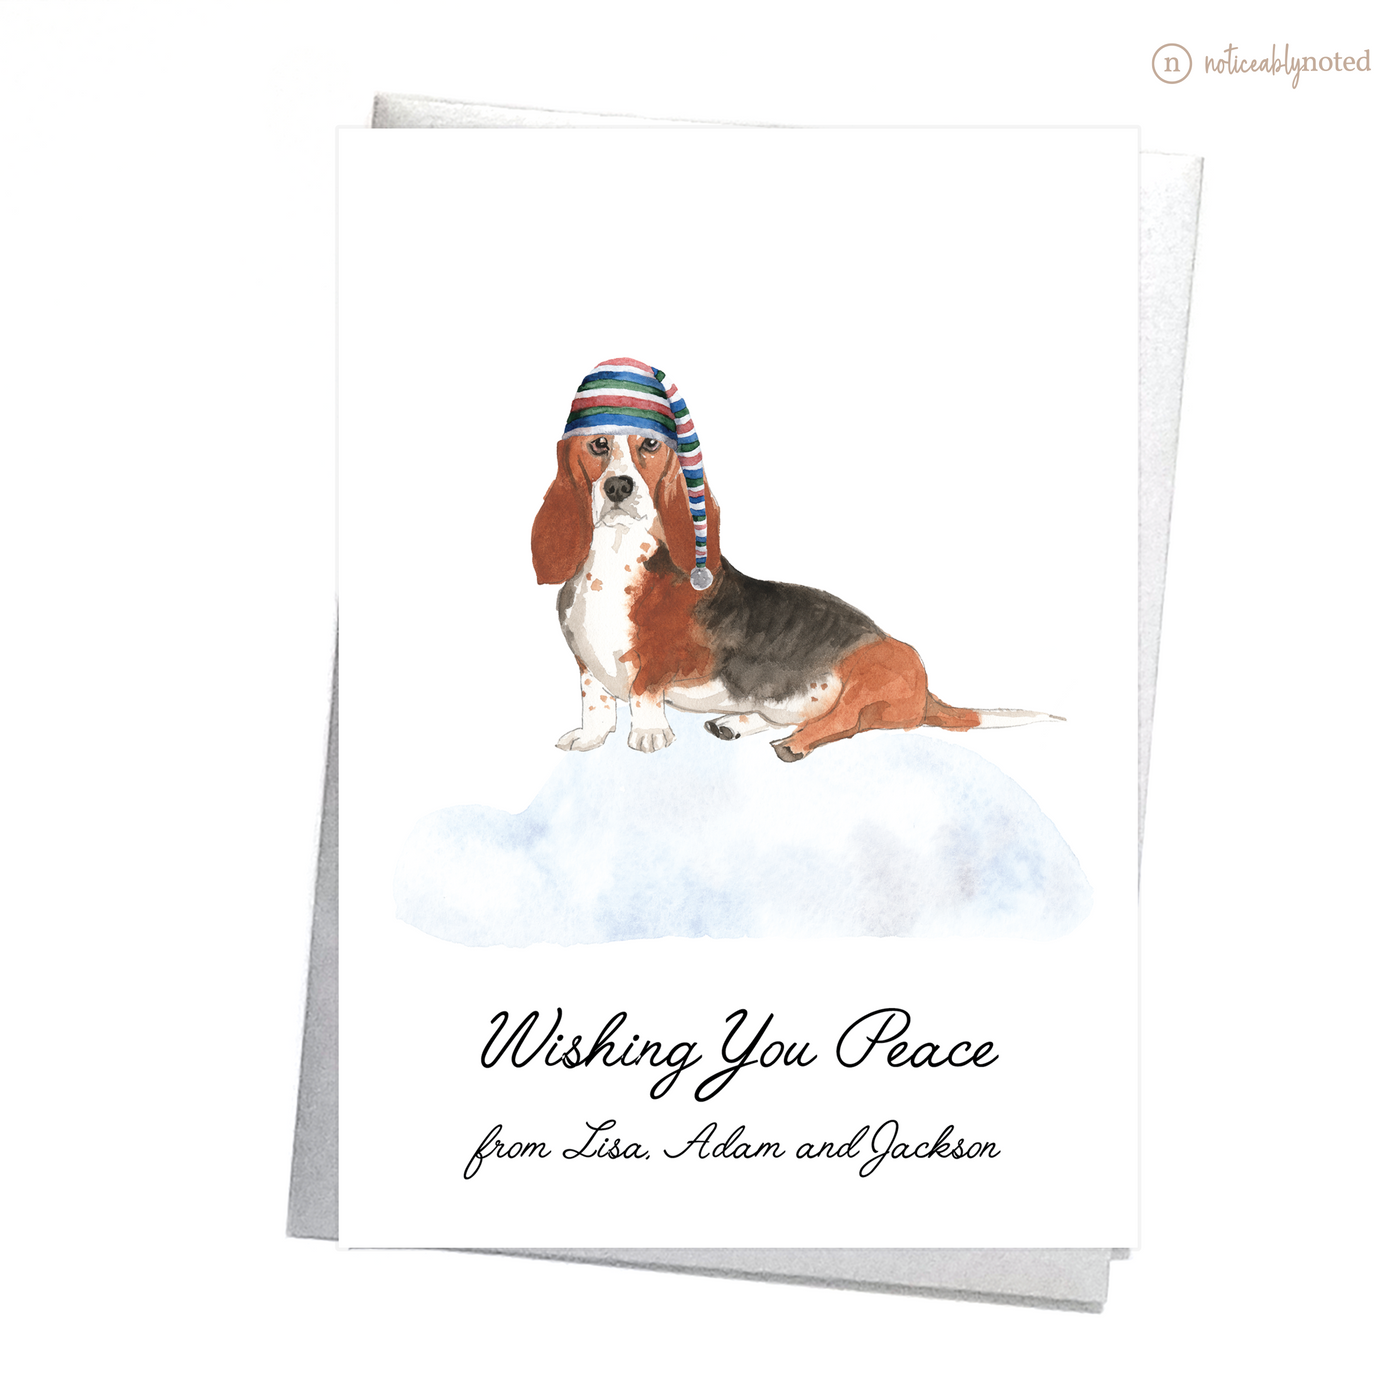 Basset Hound Dog Christmas Card | Noticeably Noted